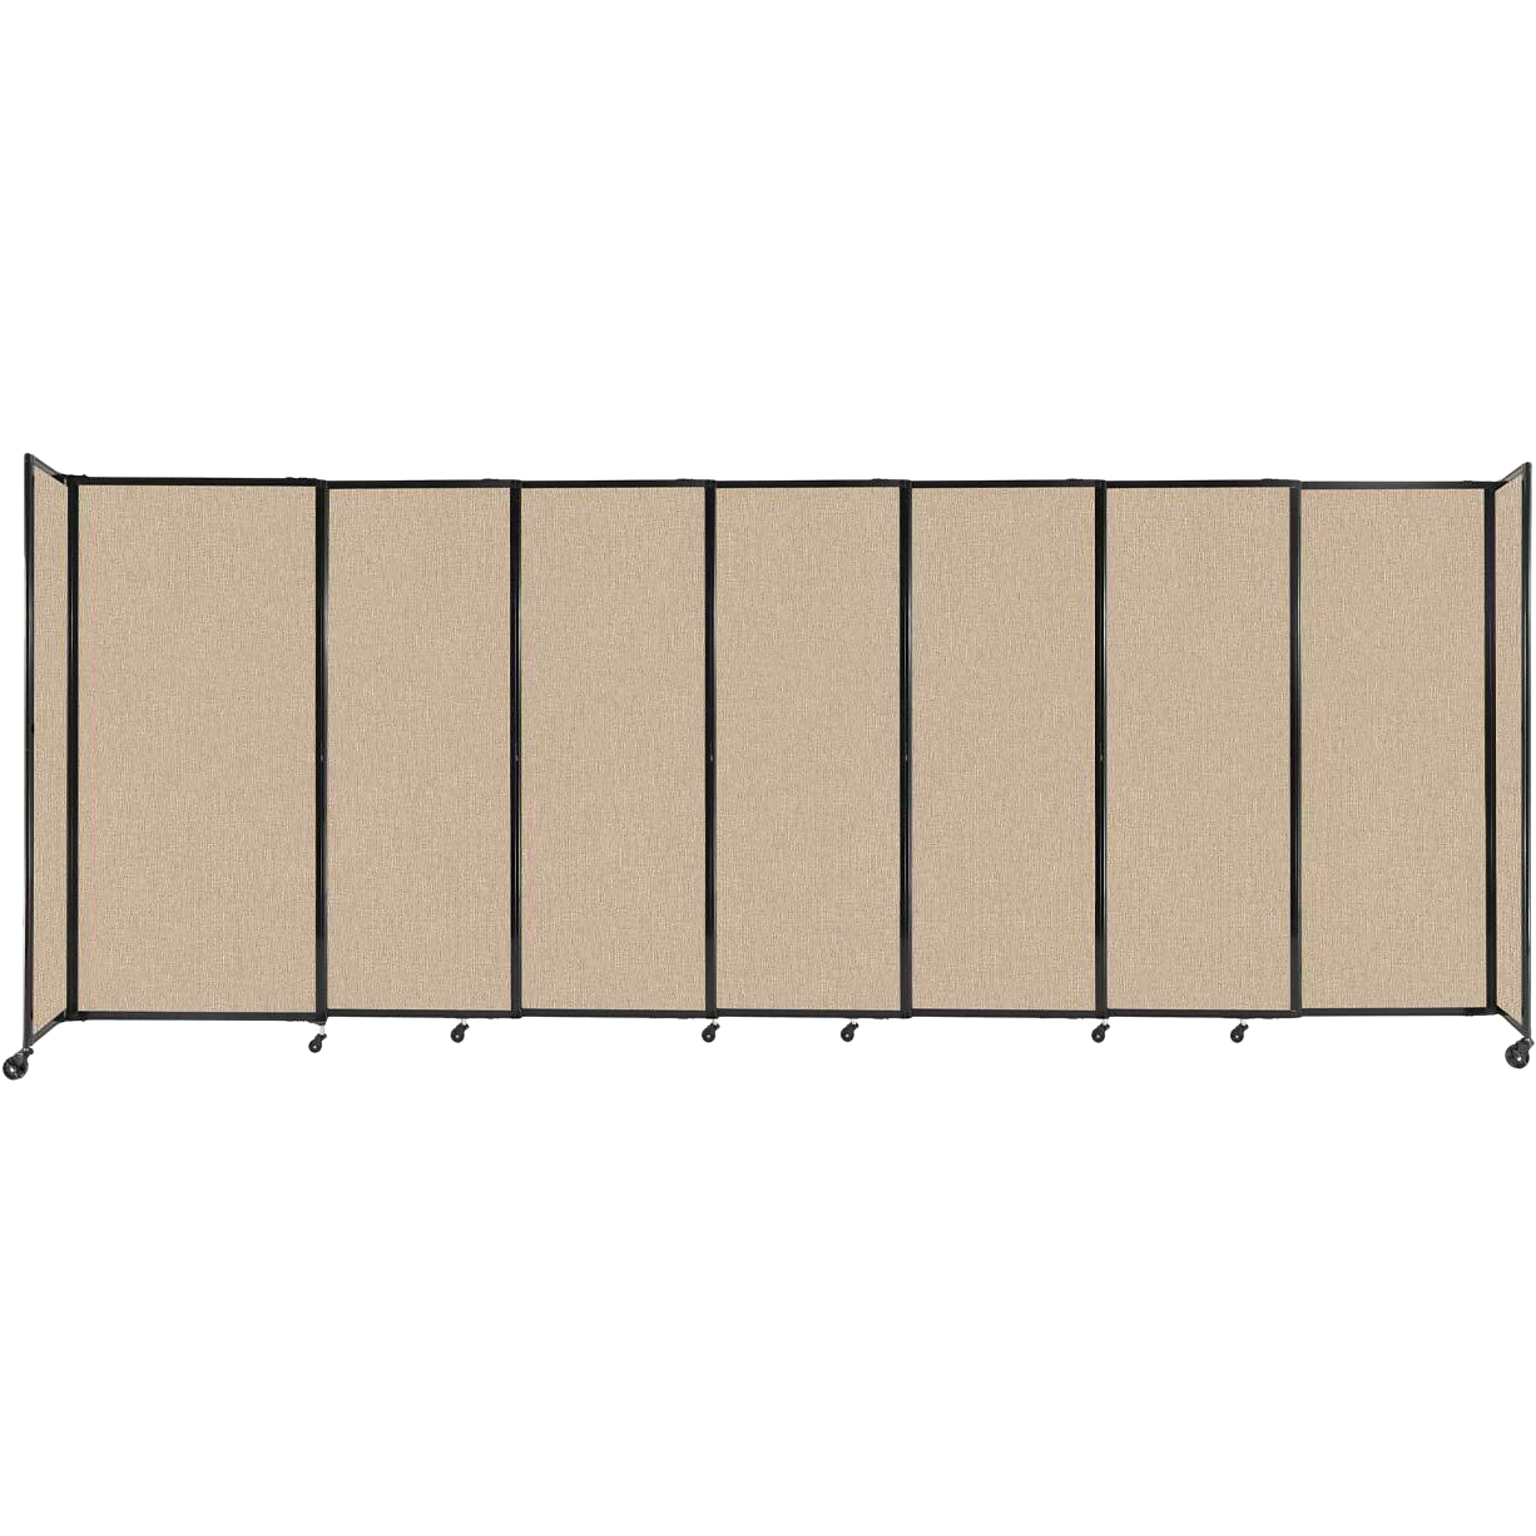 Versare StraightWall Freestanding Mobile Partition, 72H x 186W, Beige Fabric (1472701)